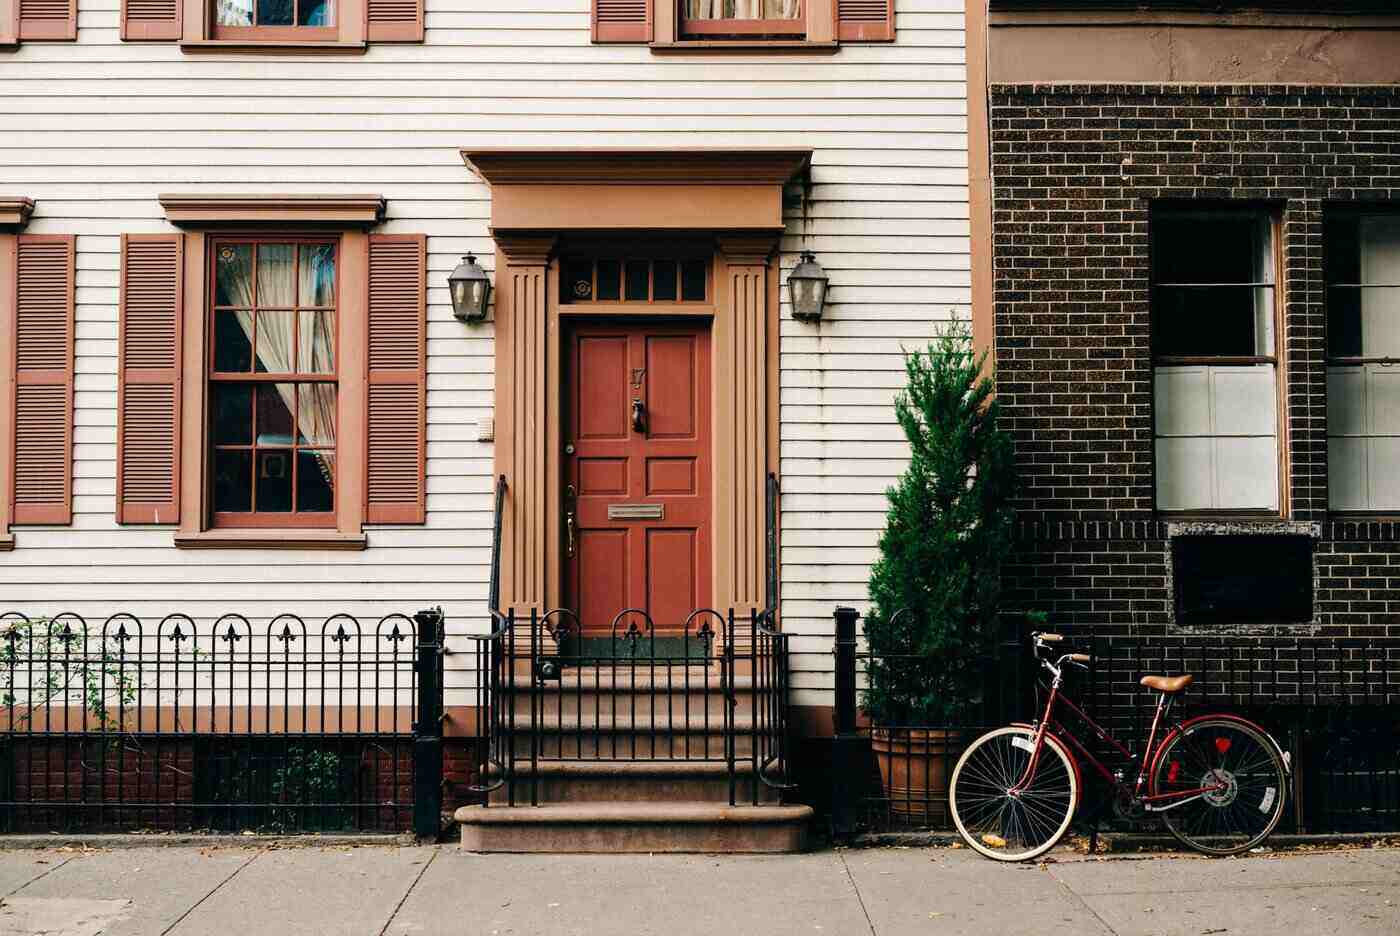 Townhouse with tree and bicycle out front - 6 ways to make your home more sustainable